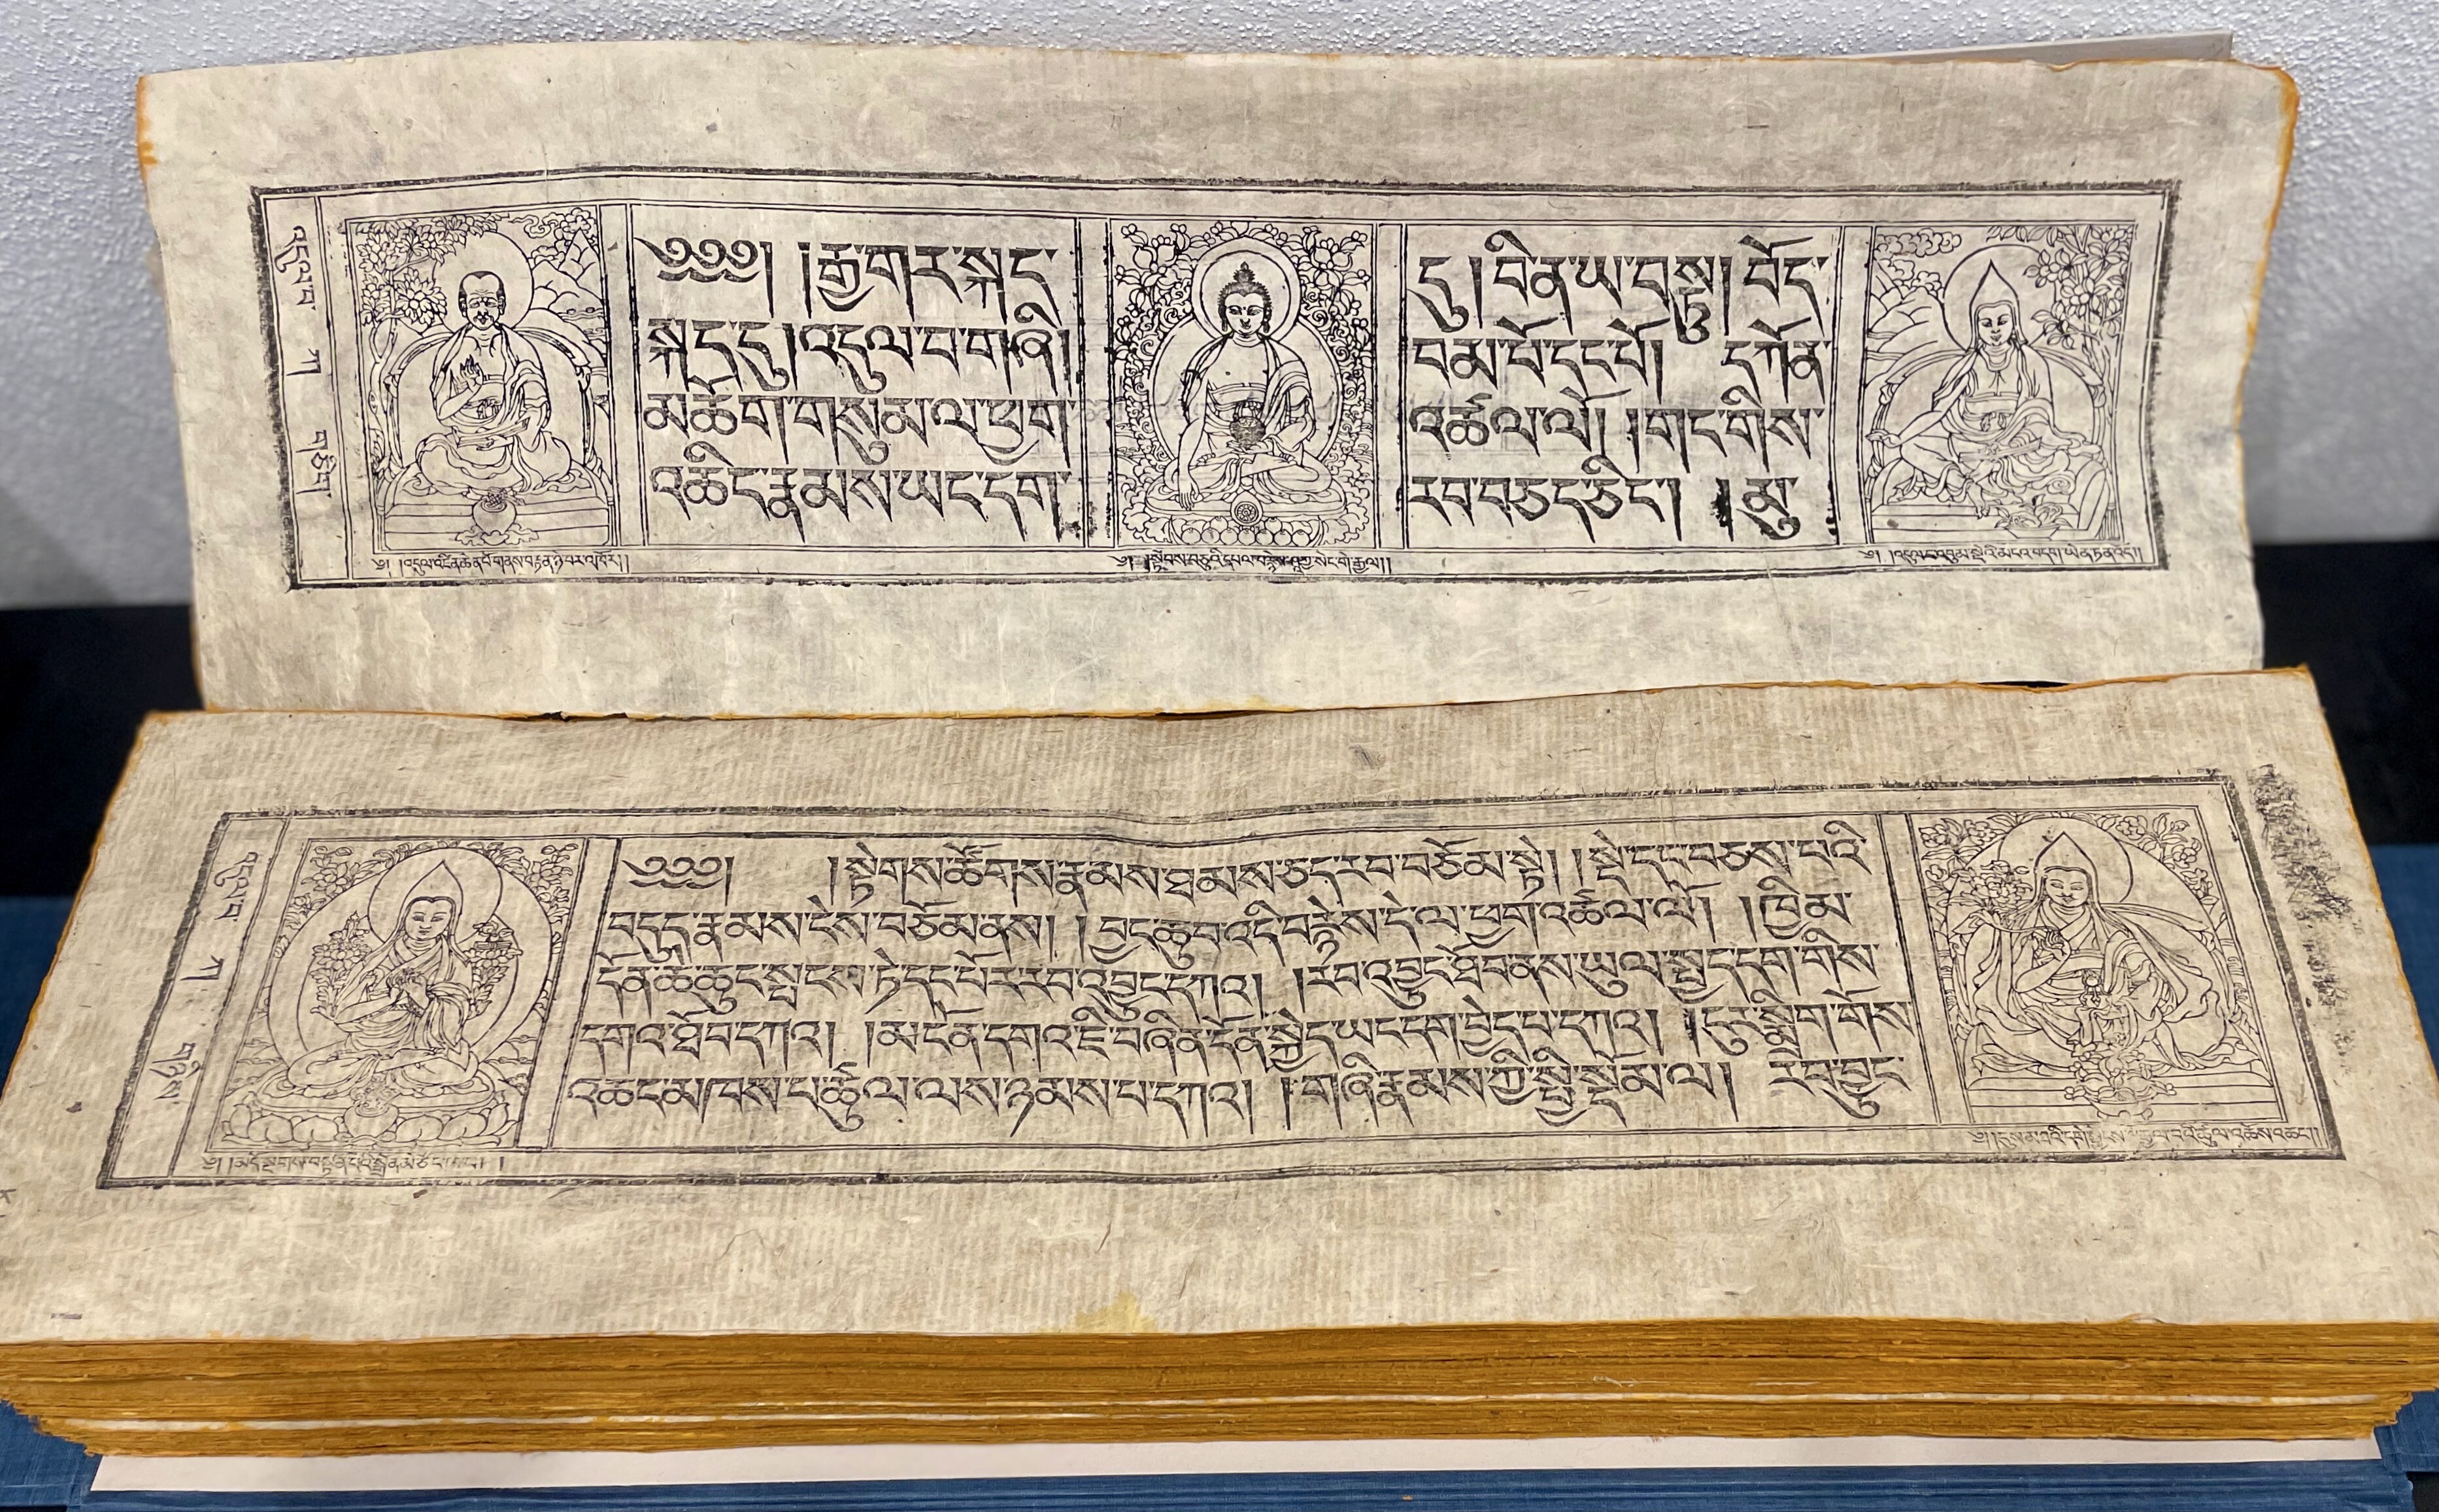 An image of two leaves of the Kanjur printed with text in Tibetan and five woodcuts of various holy figures.